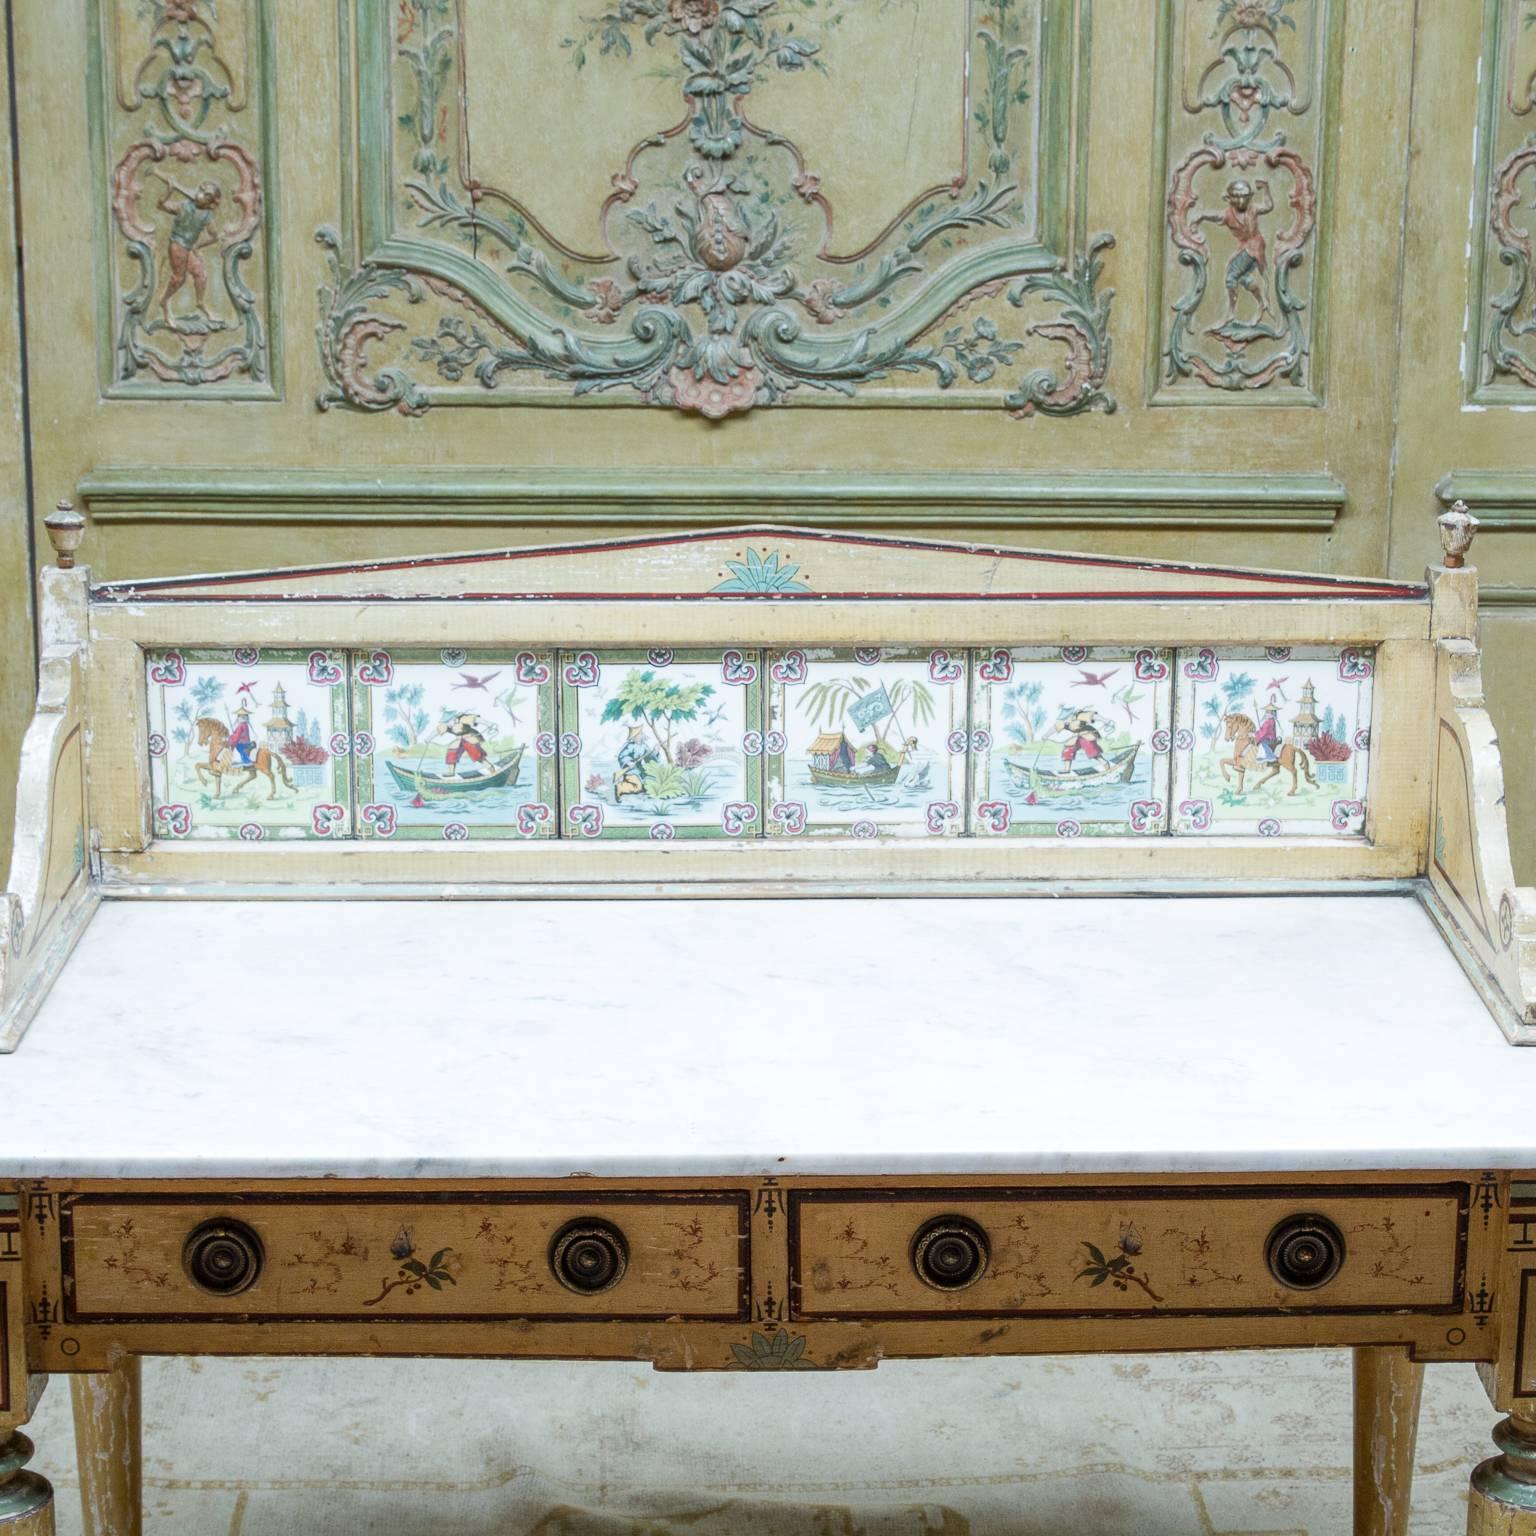 19th century English marble top painted washstand or side table with an oriental look. Wonderful old paint worn well. Marble no cracks. Nice decorative splash back having six painted porcelain plaques. Two drawers and resting on castors.